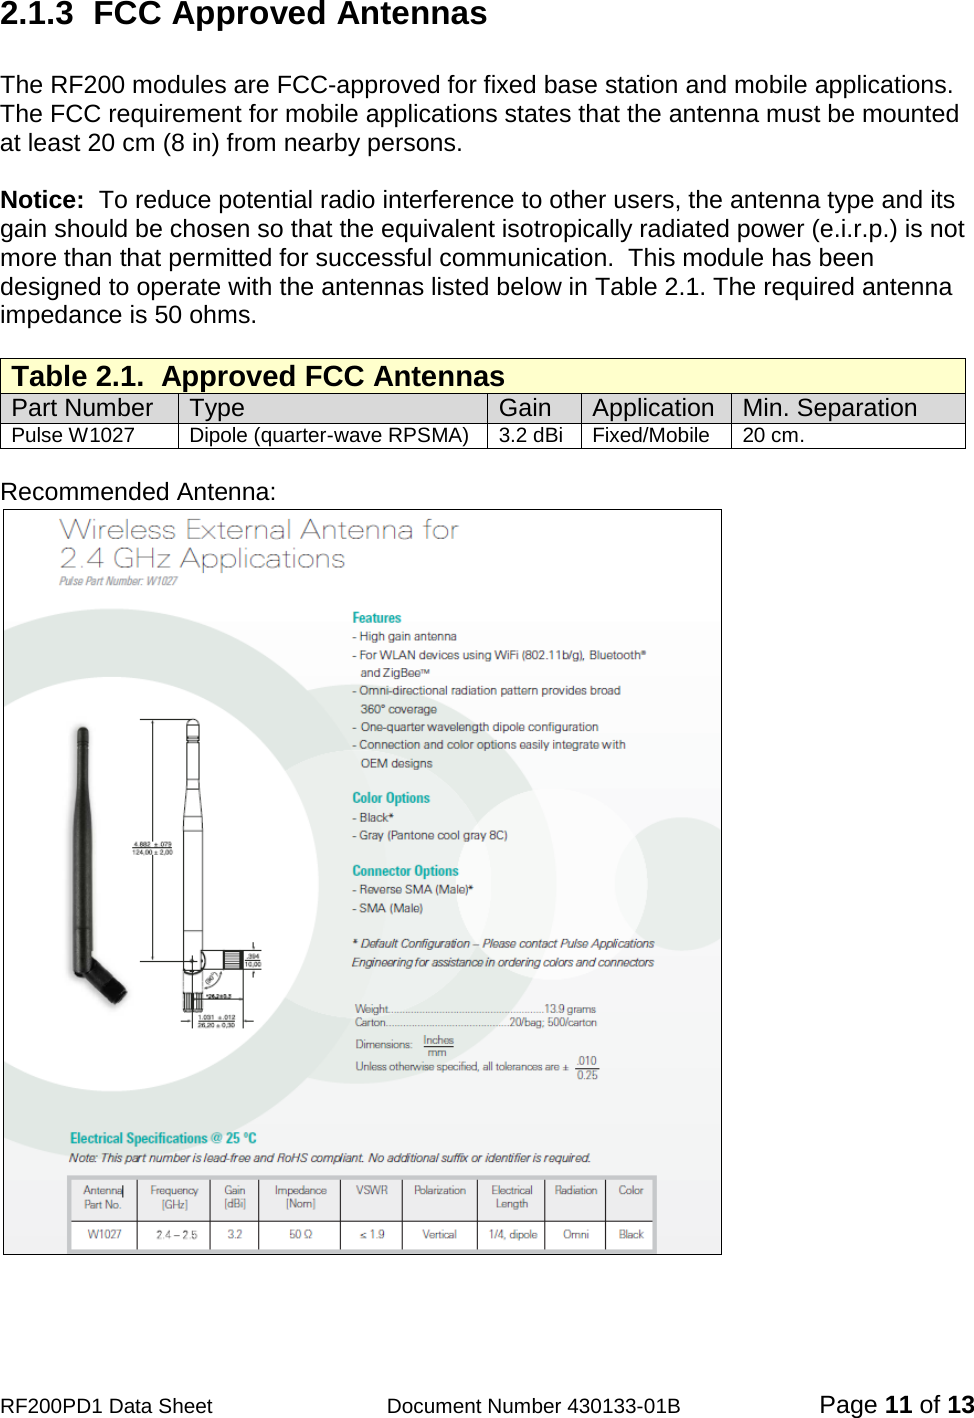                                            RF200PD1 Data Sheet                  Document Number 430133-01B  Page 11 of 13 2.1.3   FCC Approved Antennas  The RF200 modules are FCC-approved for fixed base station and mobile applications.  The FCC requirement for mobile applications states that the antenna must be mounted at least 20 cm (8 in) from nearby persons.    Notice:  To reduce potential radio interference to other users, the antenna type and its gain should be chosen so that the equivalent isotropically radiated power (e.i.r.p.) is not more than that permitted for successful communication.  This module has been designed to operate with the antennas listed below in Table 2.1. The required antenna impedance is 50 ohms.  Table 2.1.  Approved FCC Antennas Part Number Type  Gain Application Min. Separation Pulse W1027 Dipole (quarter-wave RPSMA) 3.2 dBi Fixed/Mobile 20 cm.  Recommended Antenna:   